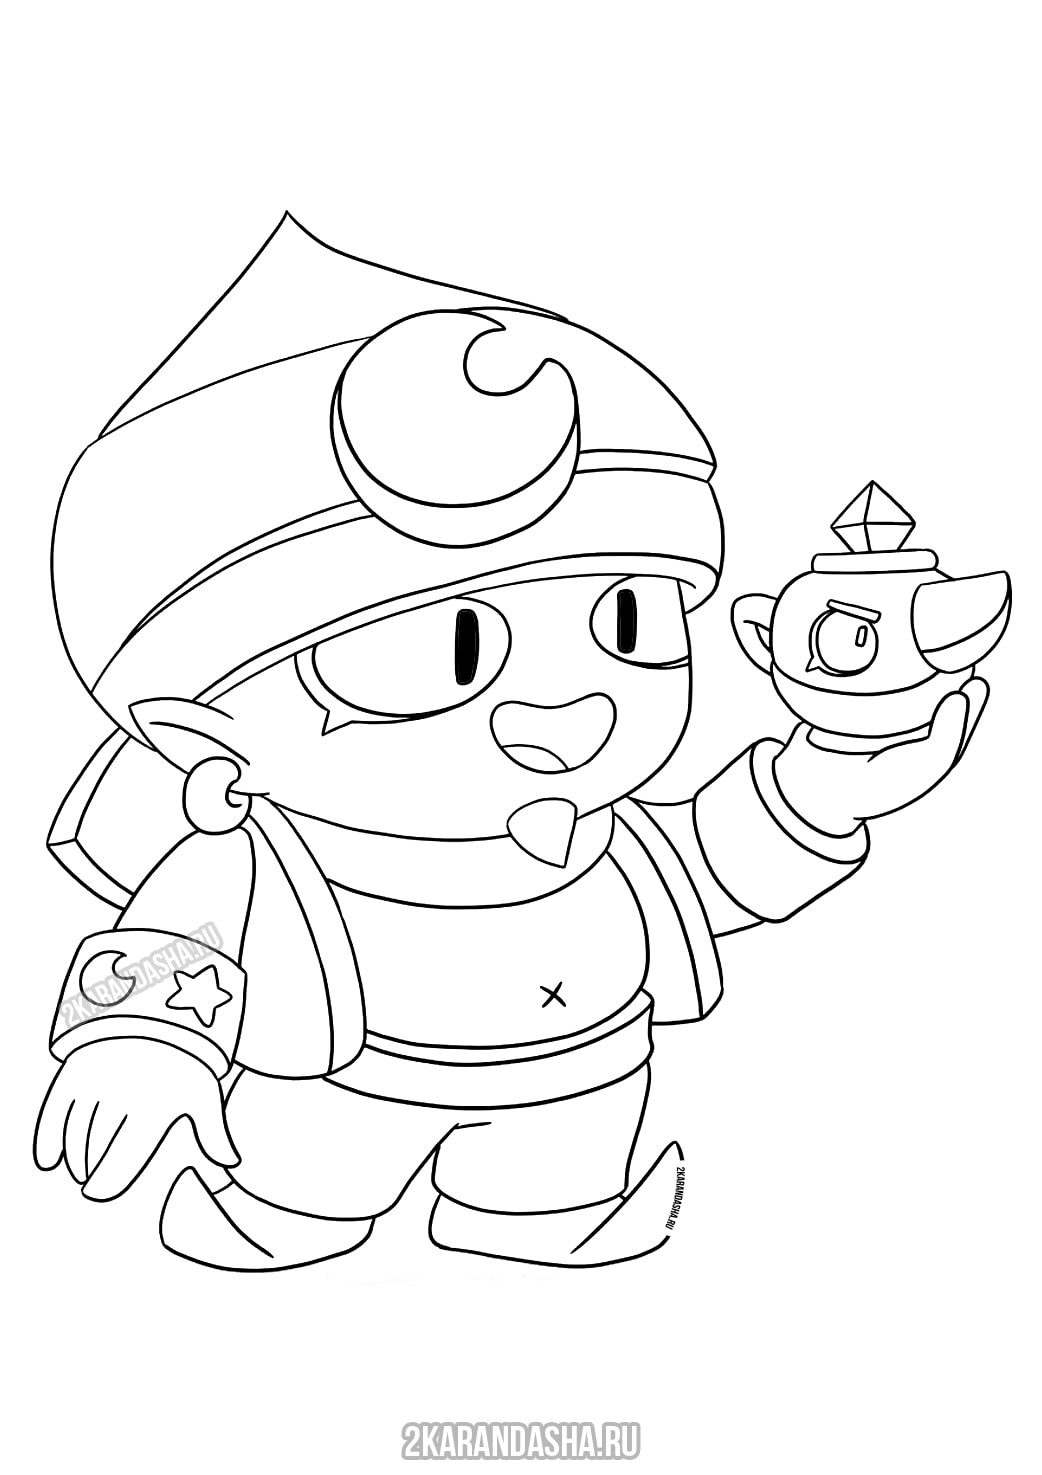 Coloring Page Brawl Stars Genie With Lamp Print Brawl Stars - brawl stars genie